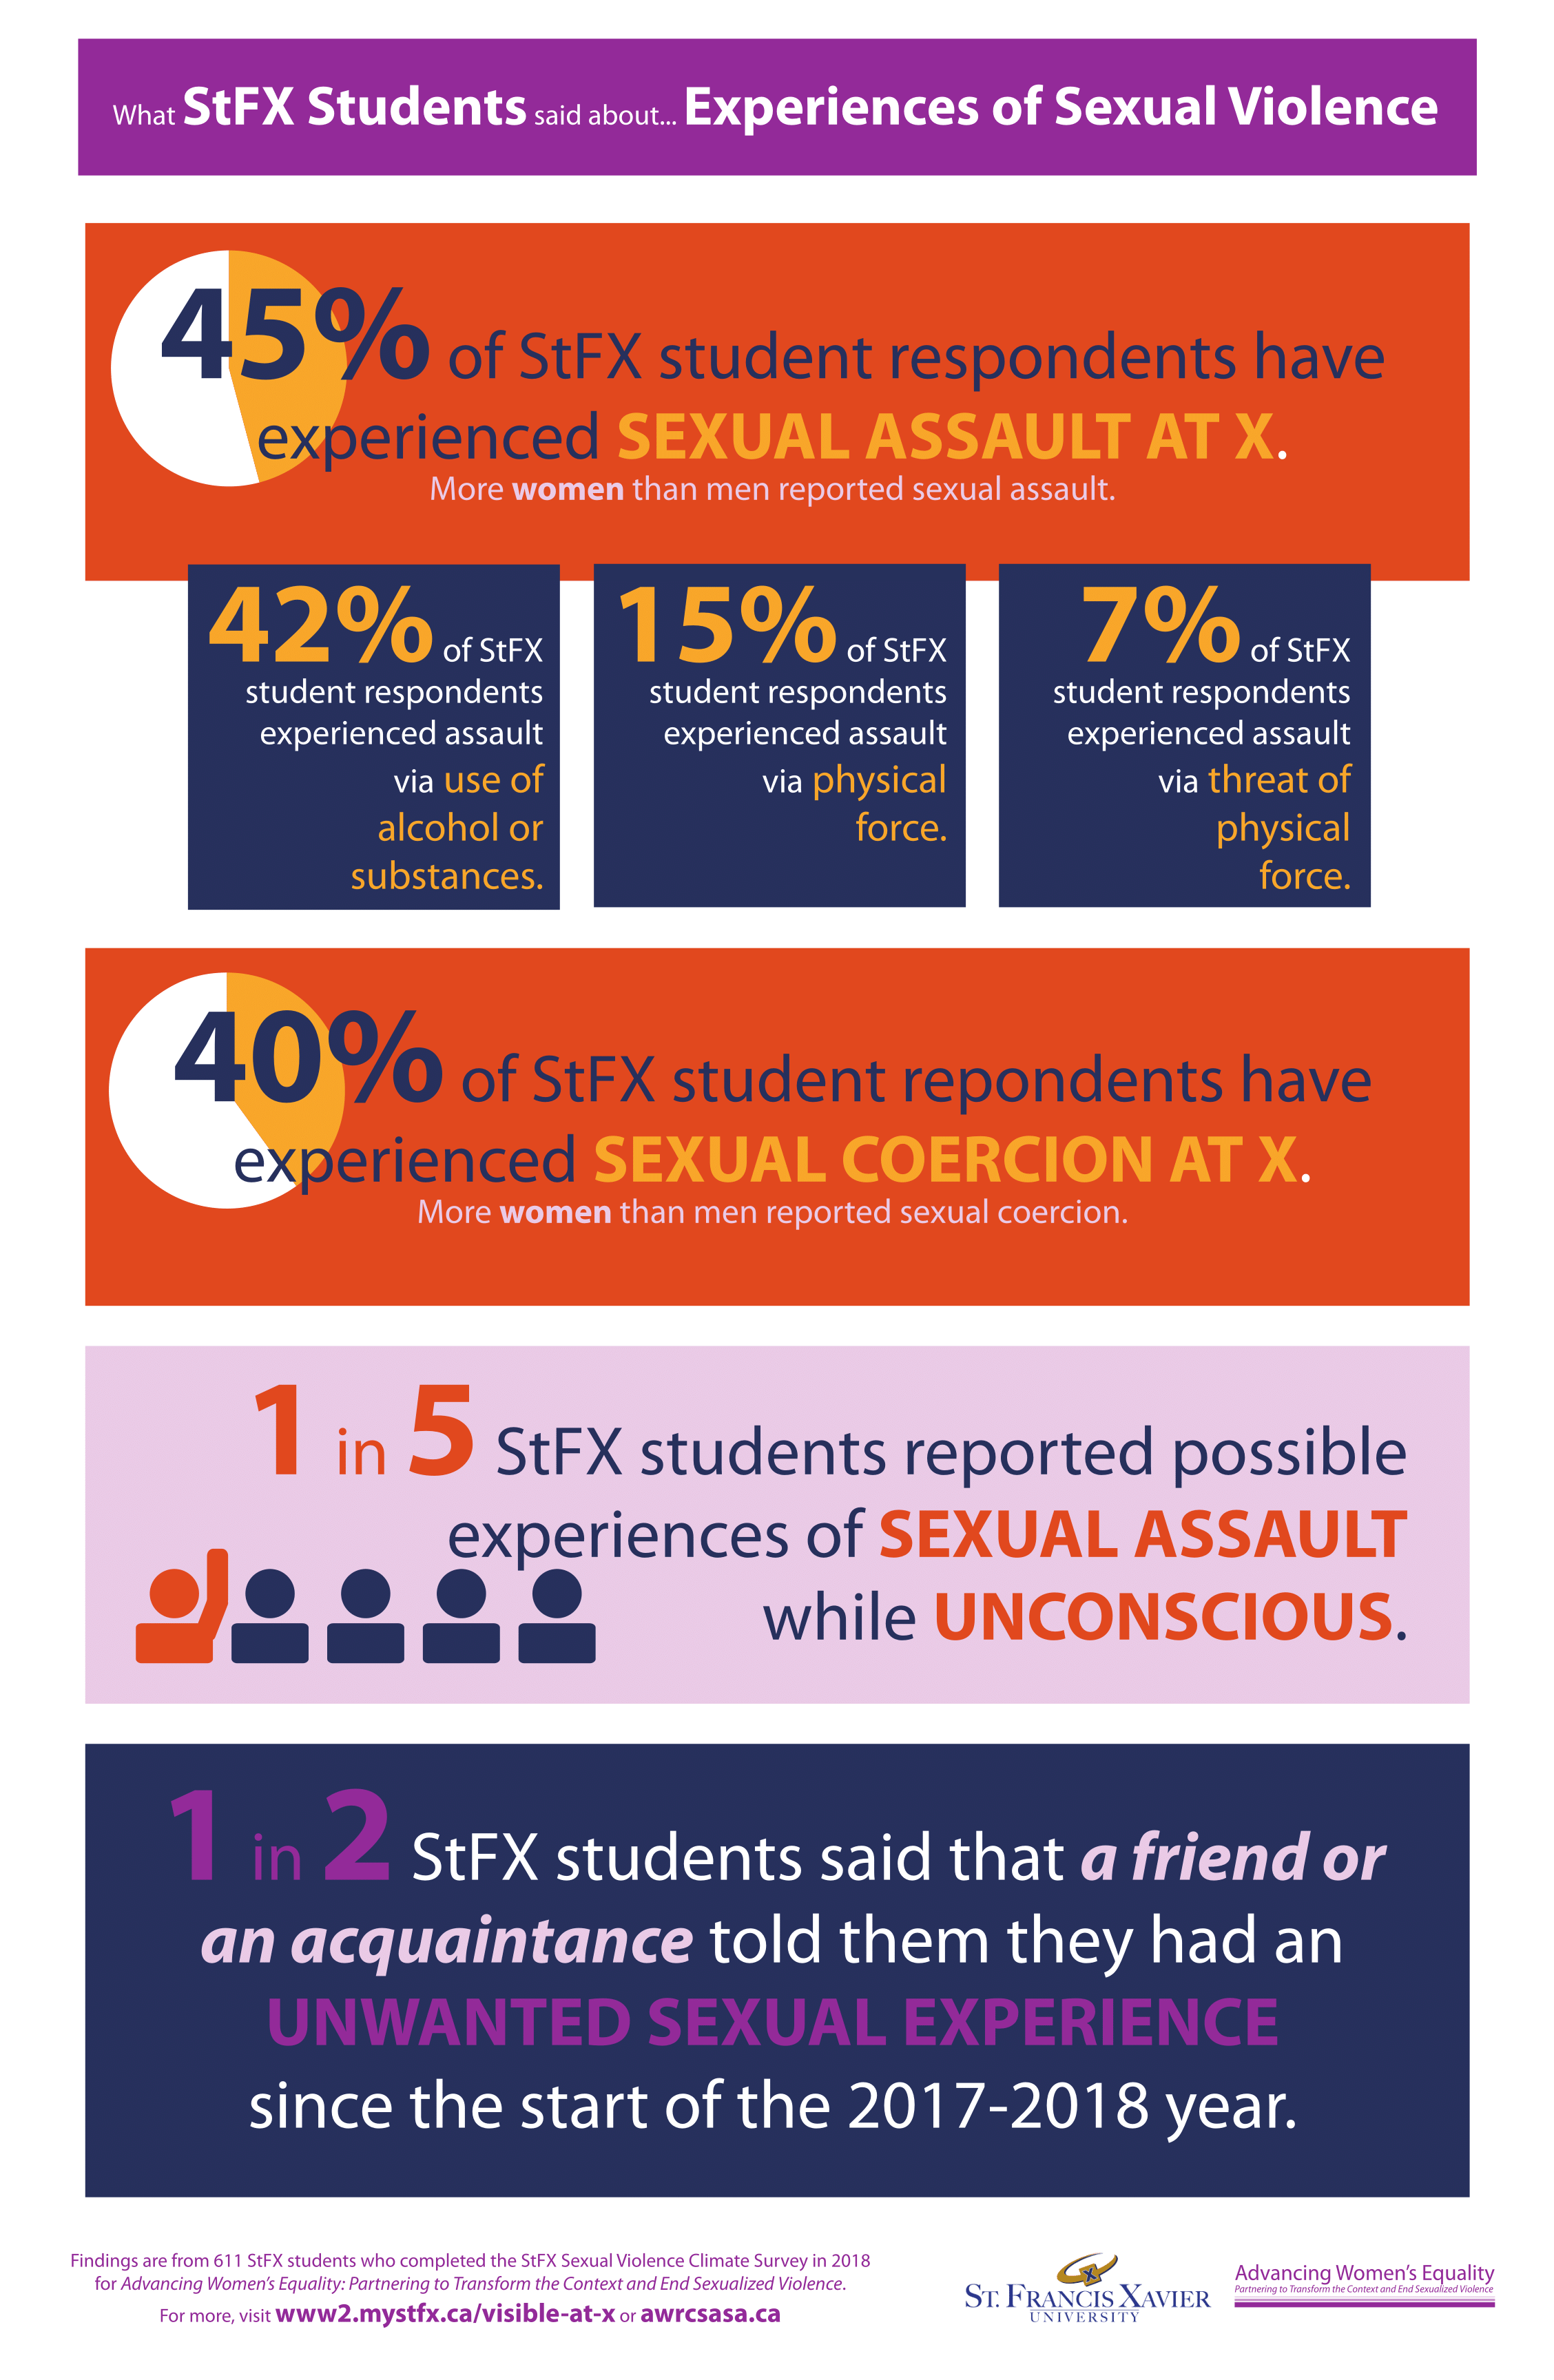 Sexual Violence Experiences